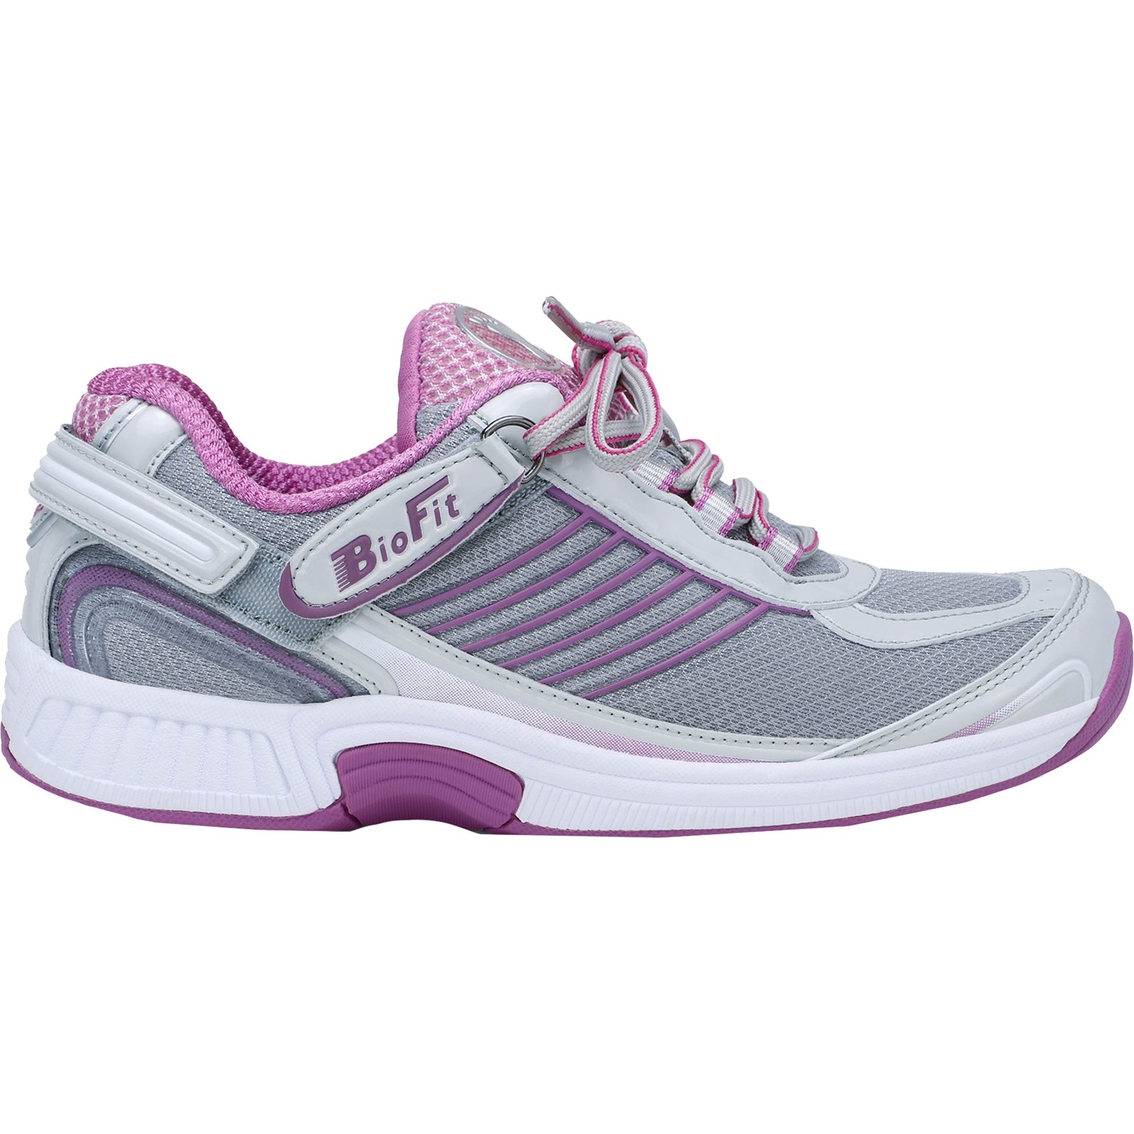 OrthoFeet Women's Verve Tie-Less Sneakers - Image 2 of 5